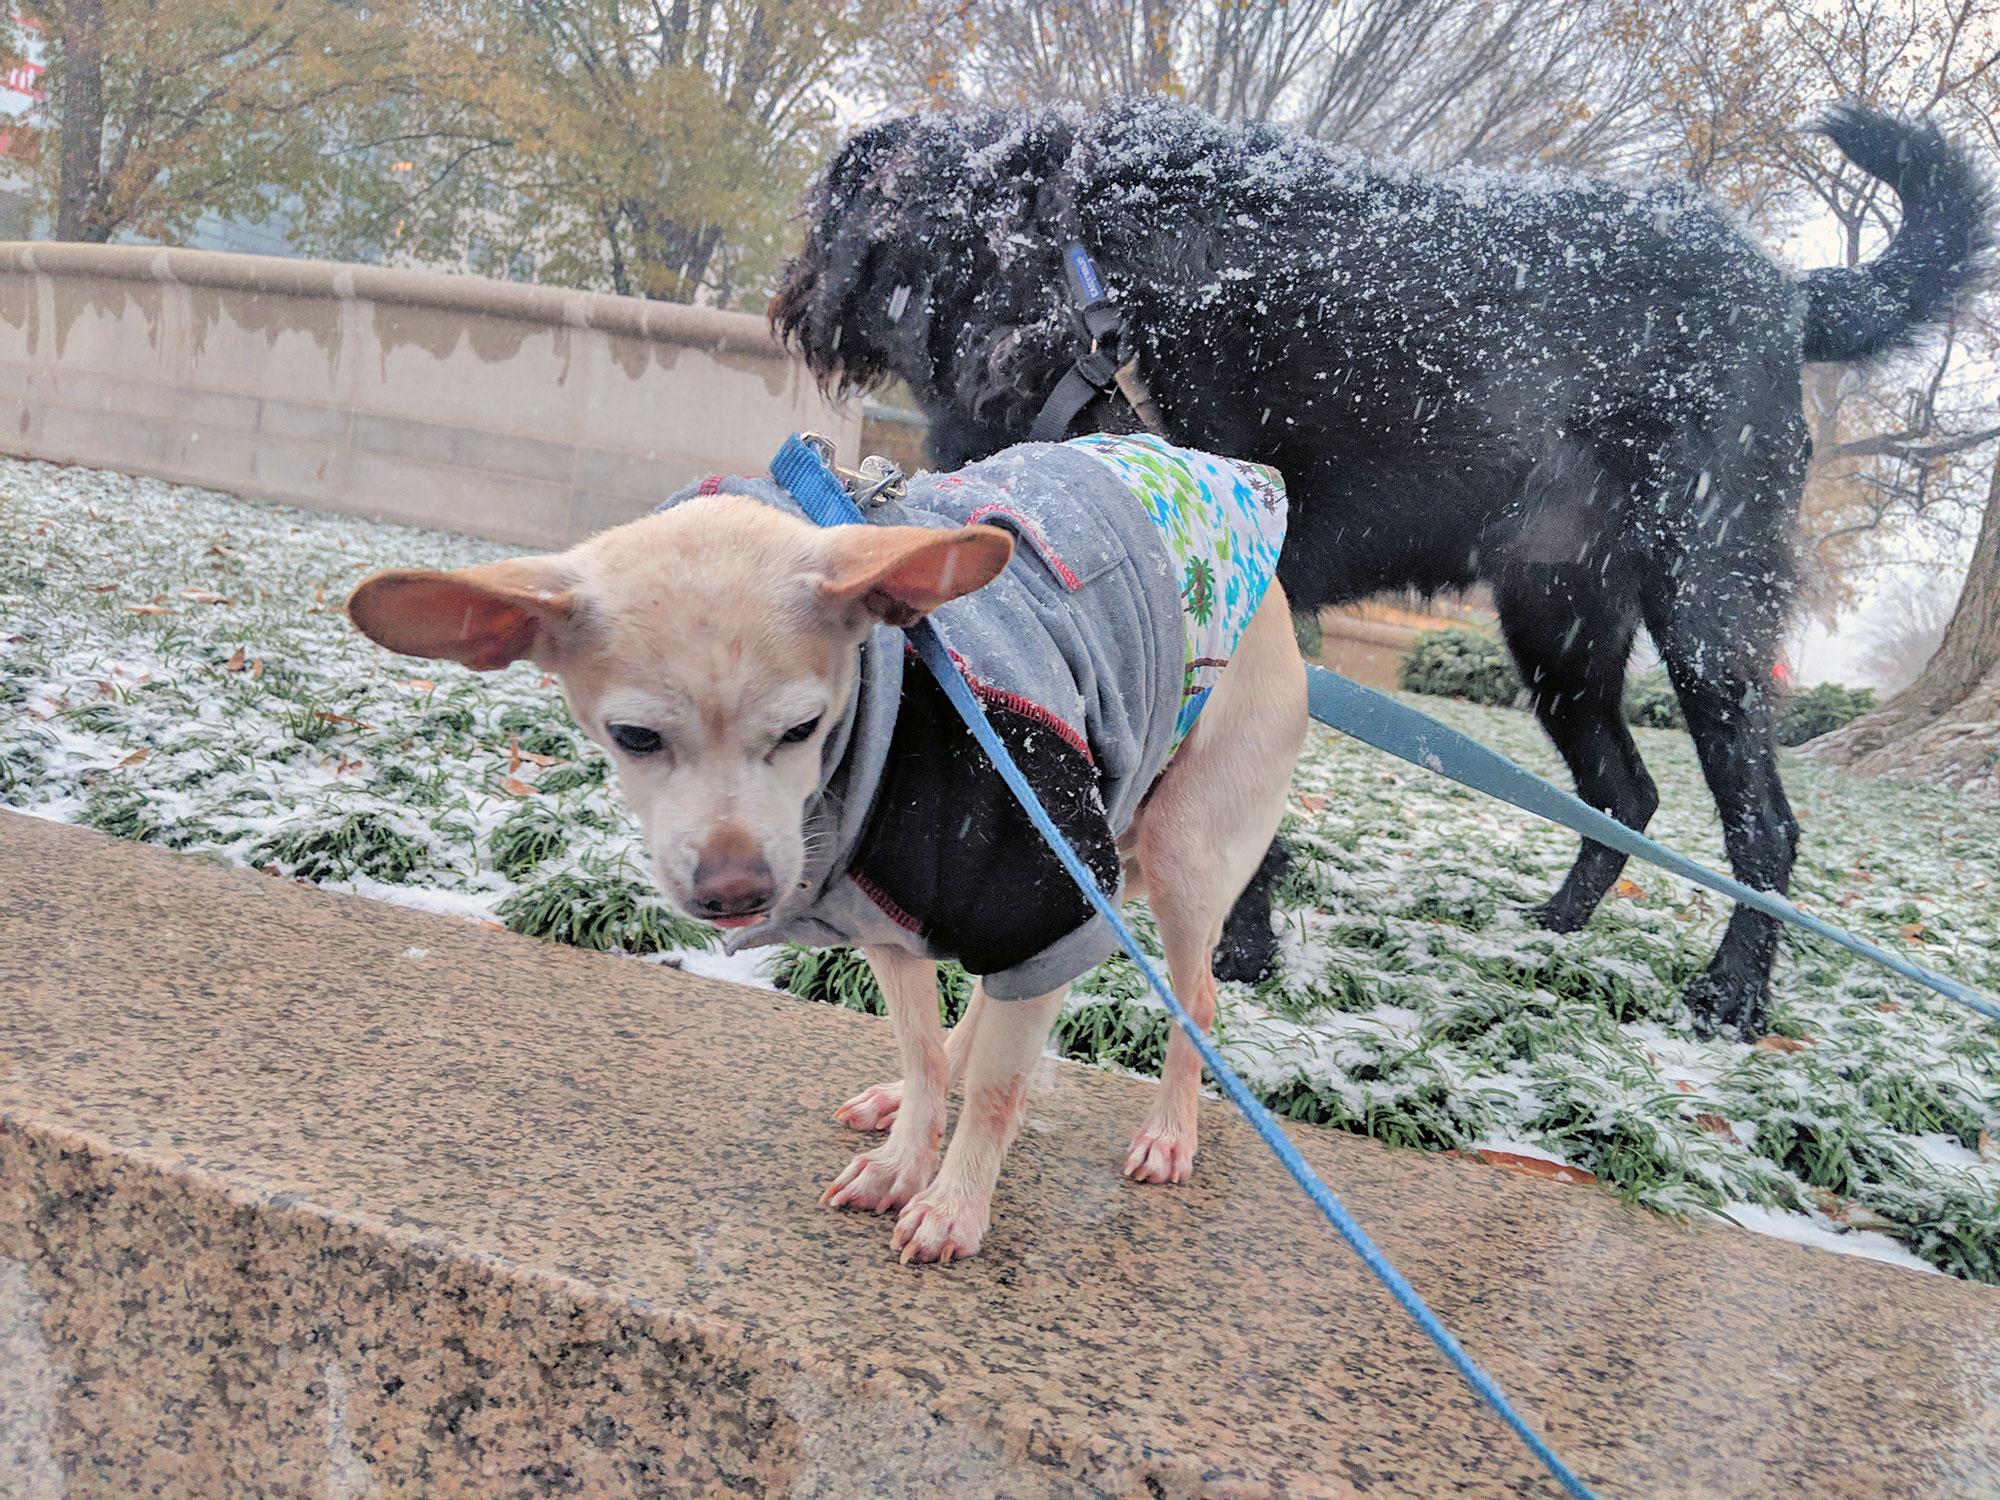 Gunter and Ingrid during the first Washington D.C. snow storm of the season.